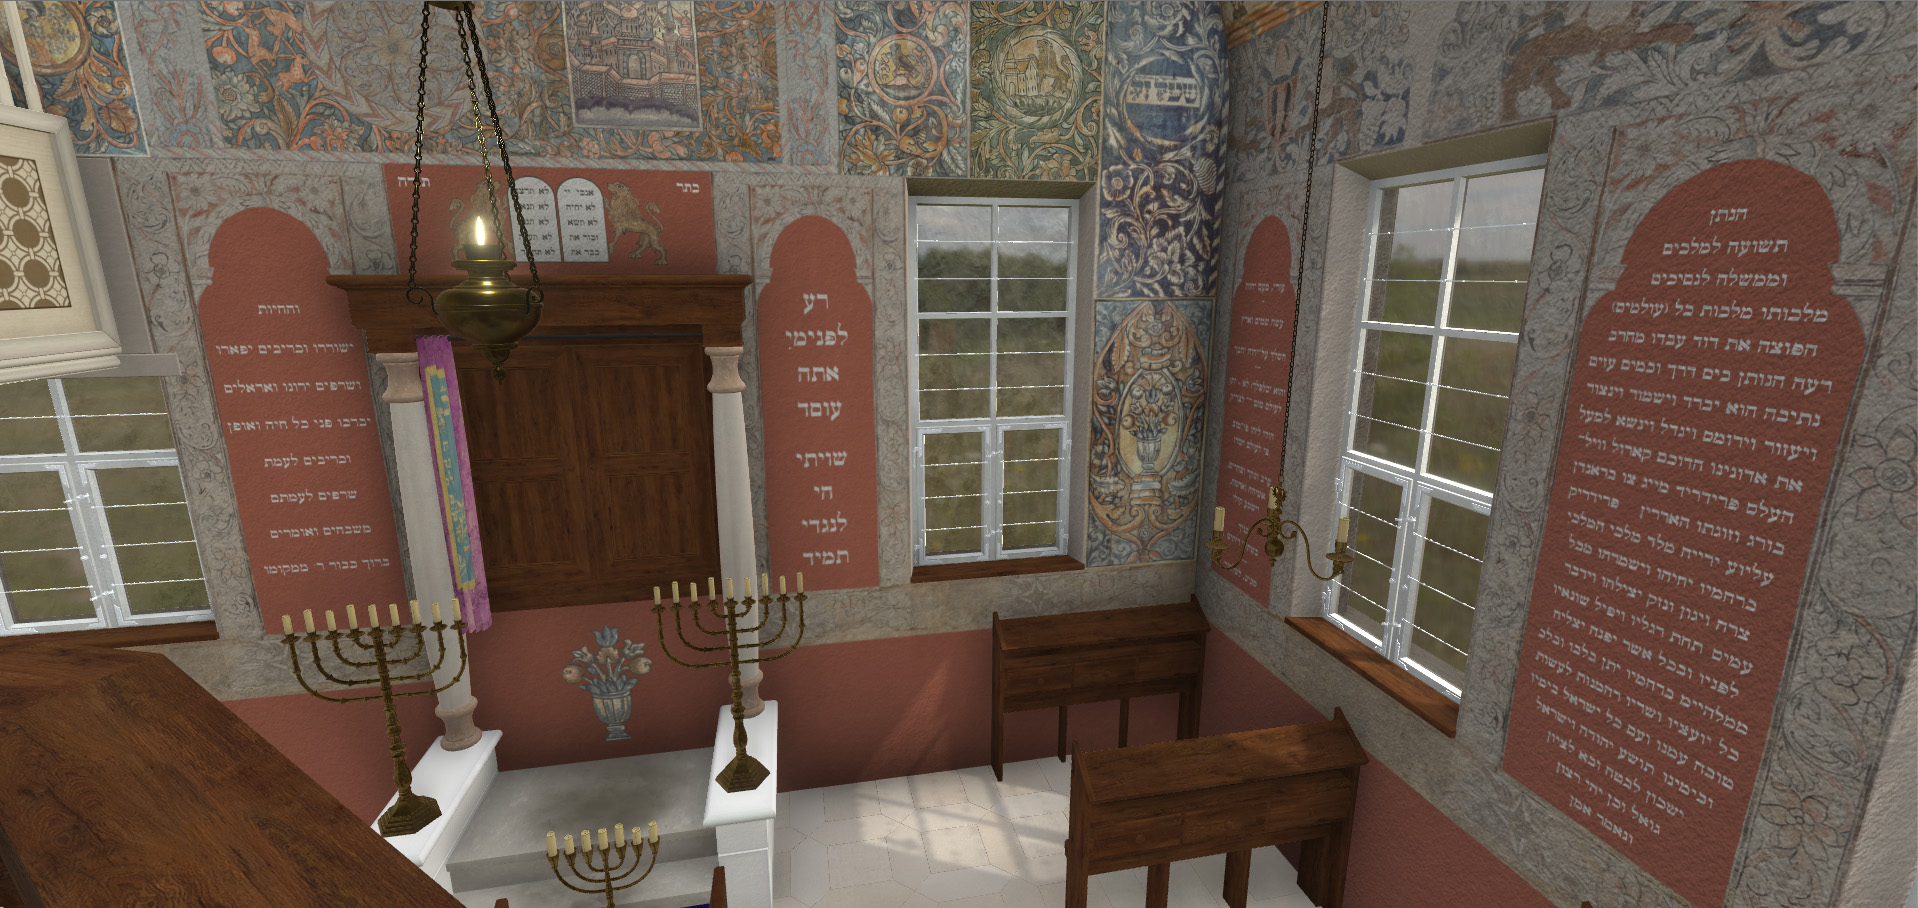 Synagogue - digital reconstruction of the wall paintings